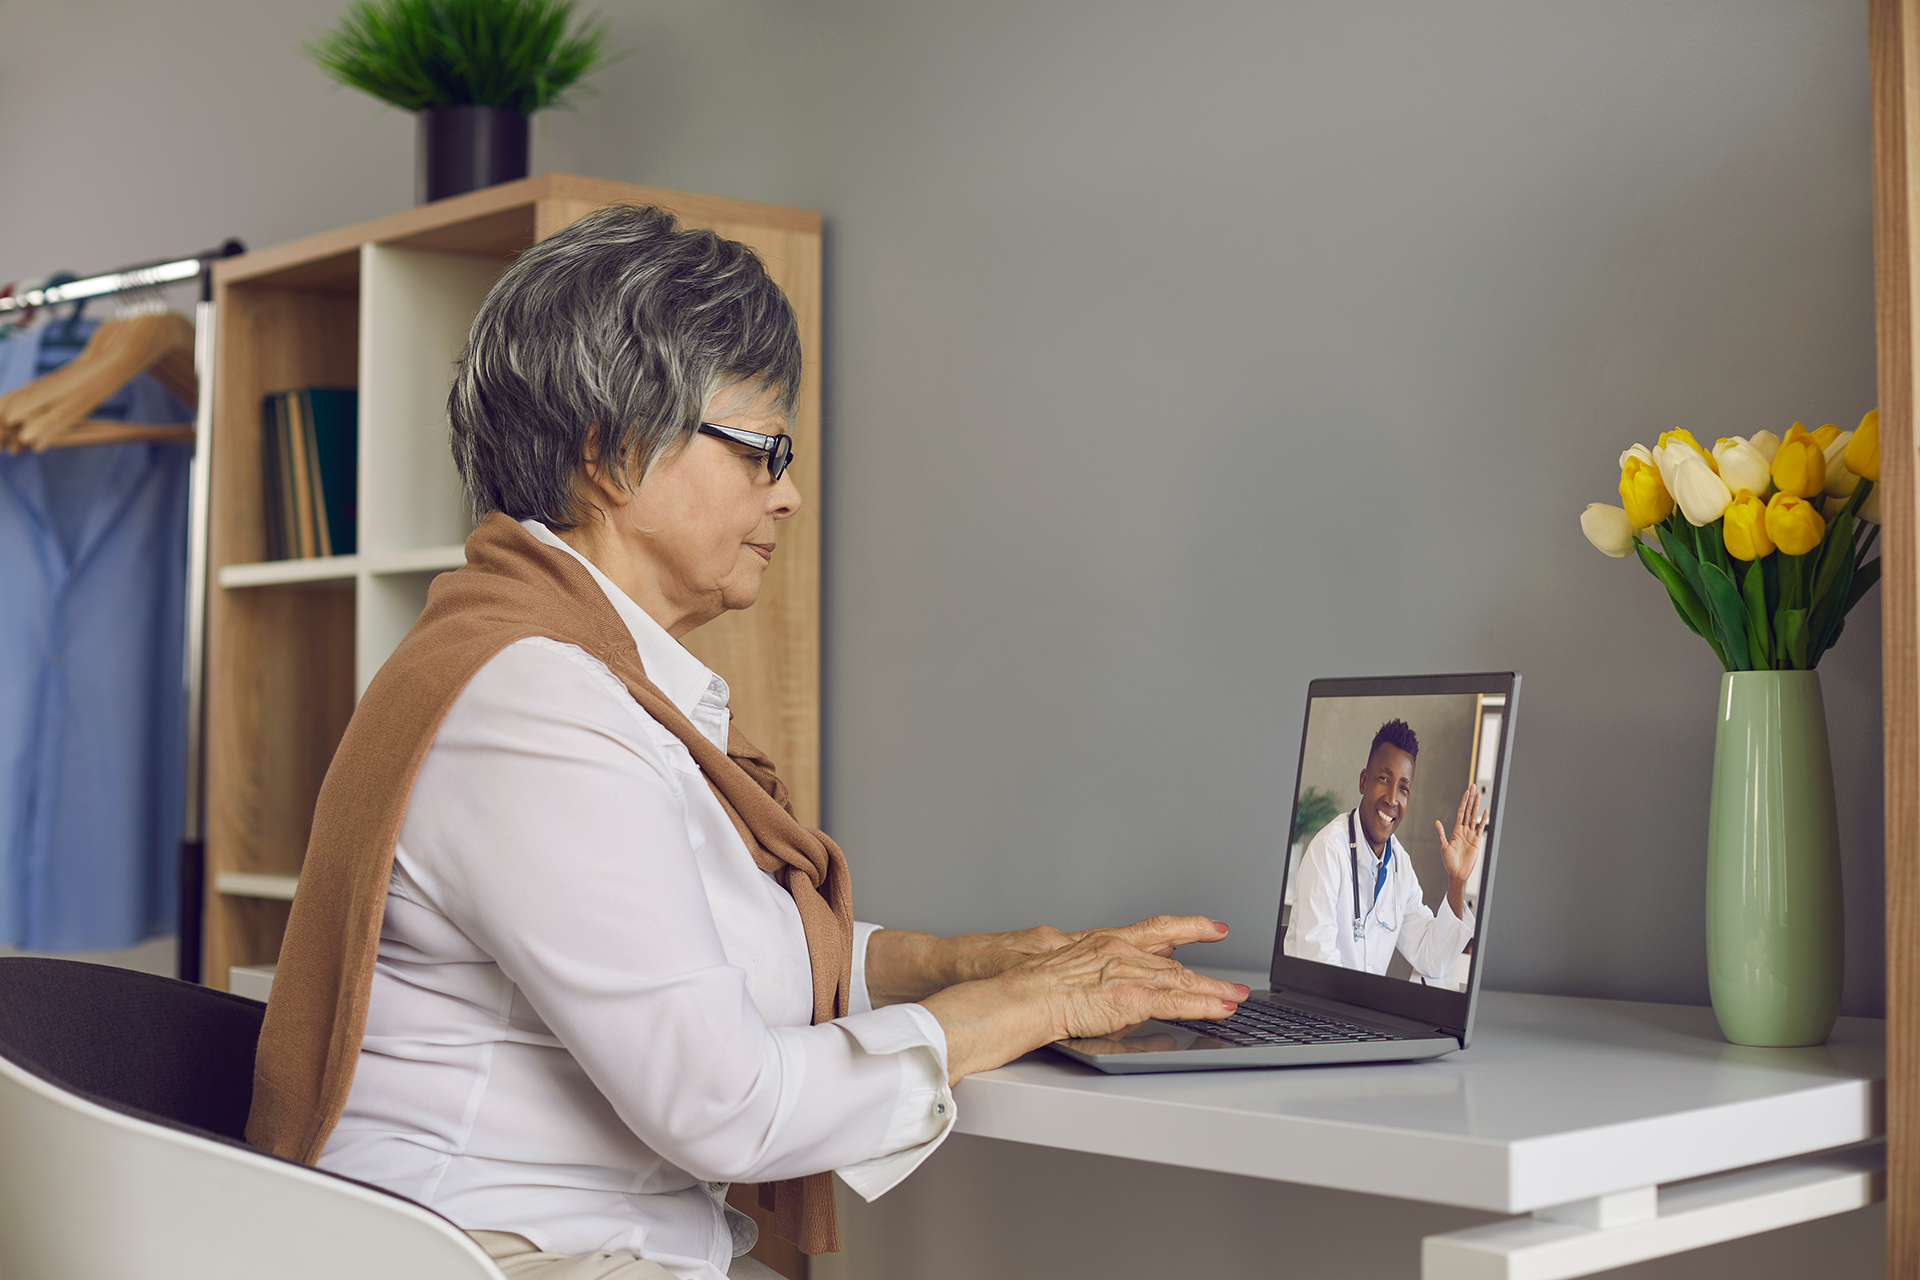 A patient accessing remote healthcare to speak to her doctor from home on her laptop